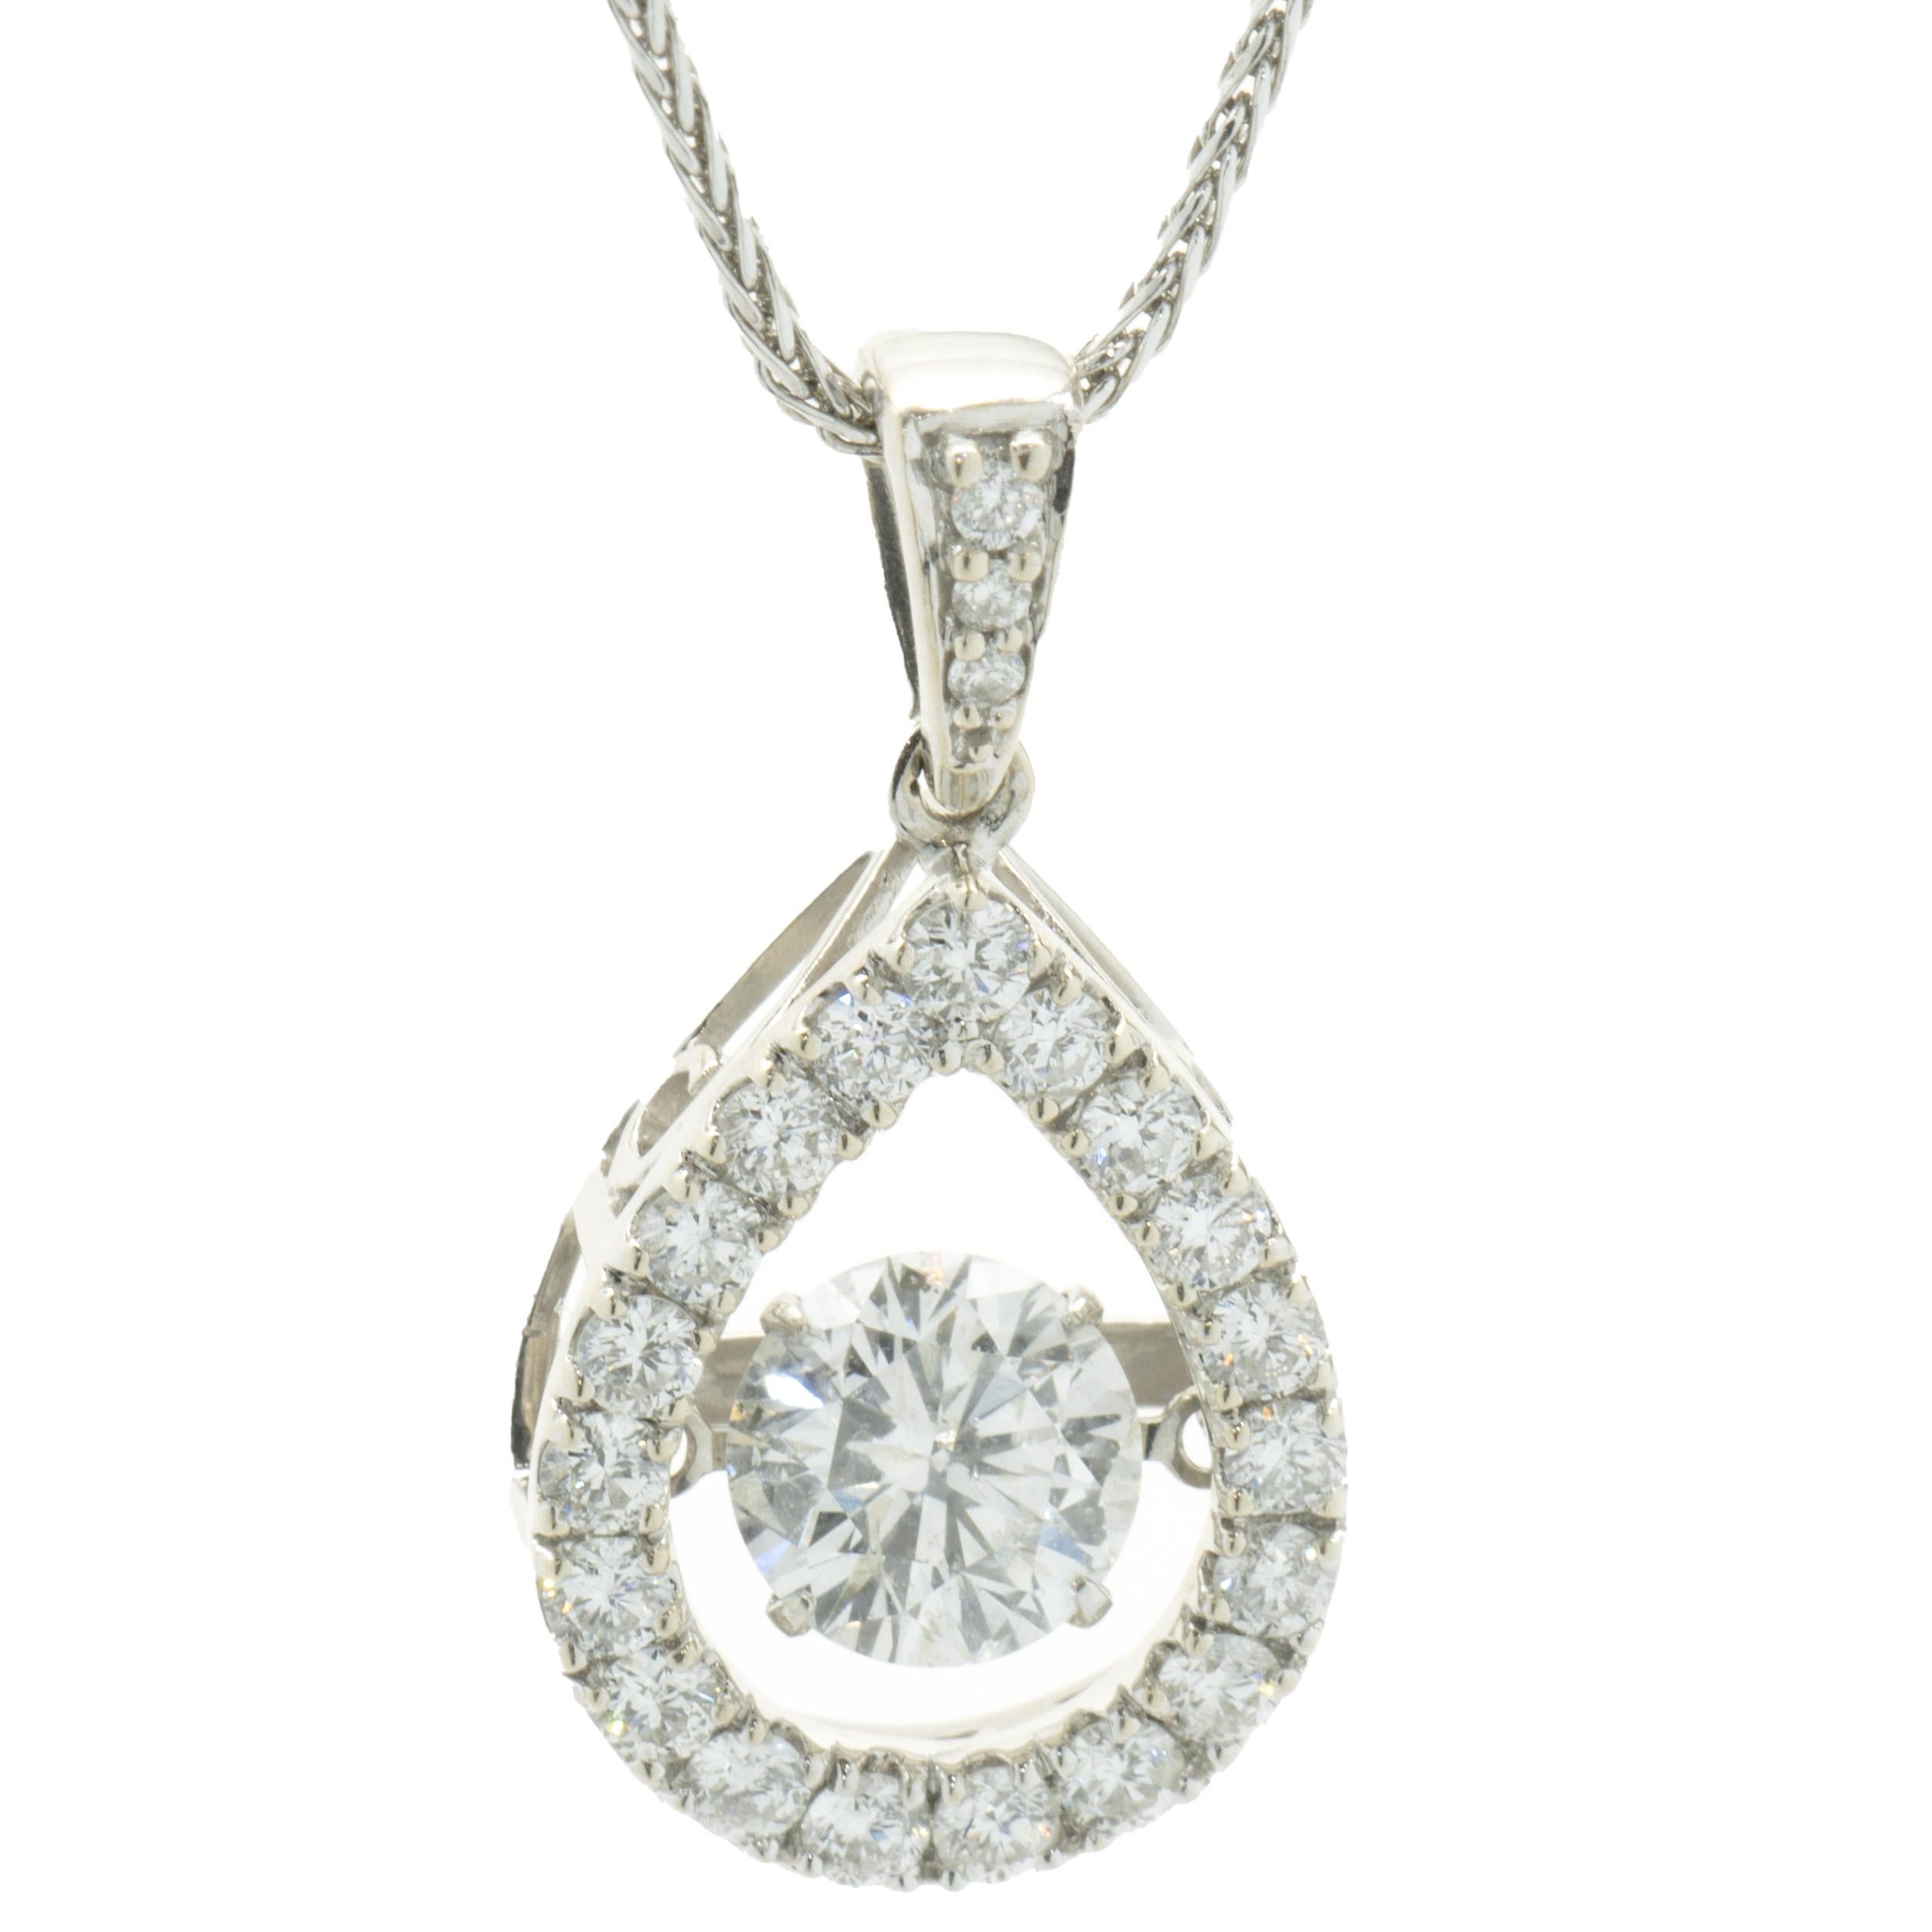 Designer: custom design
Material: 14K white gold
Diamond: 23 round brilliant cut = 1.64cttw
Color: H/I
Clarity: SI2-I1
Dimensions: necklace measures 18-inches in length 
Weight: 5.00 grams